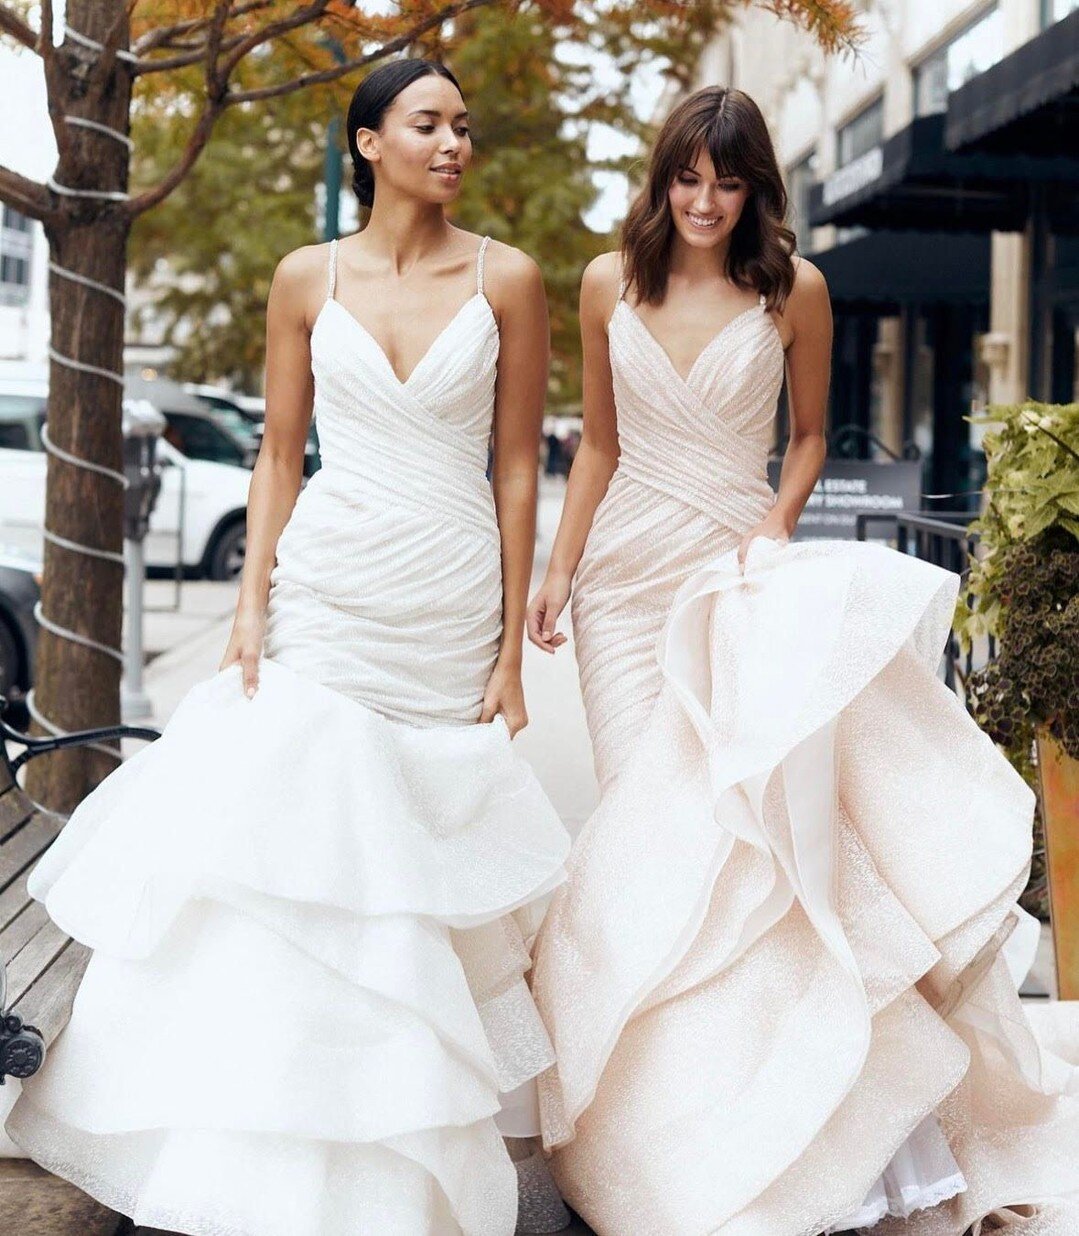 Make a statement in the captivating #CatalinaGown from Lazaro's collection. 
Which is your favorite - ivory or blush?

Catalina gown is featured in our bridal Salon. Call us today!

#luxurybride#wedding2023#bride2023#nybfw#dreamwedding#weddinginspira